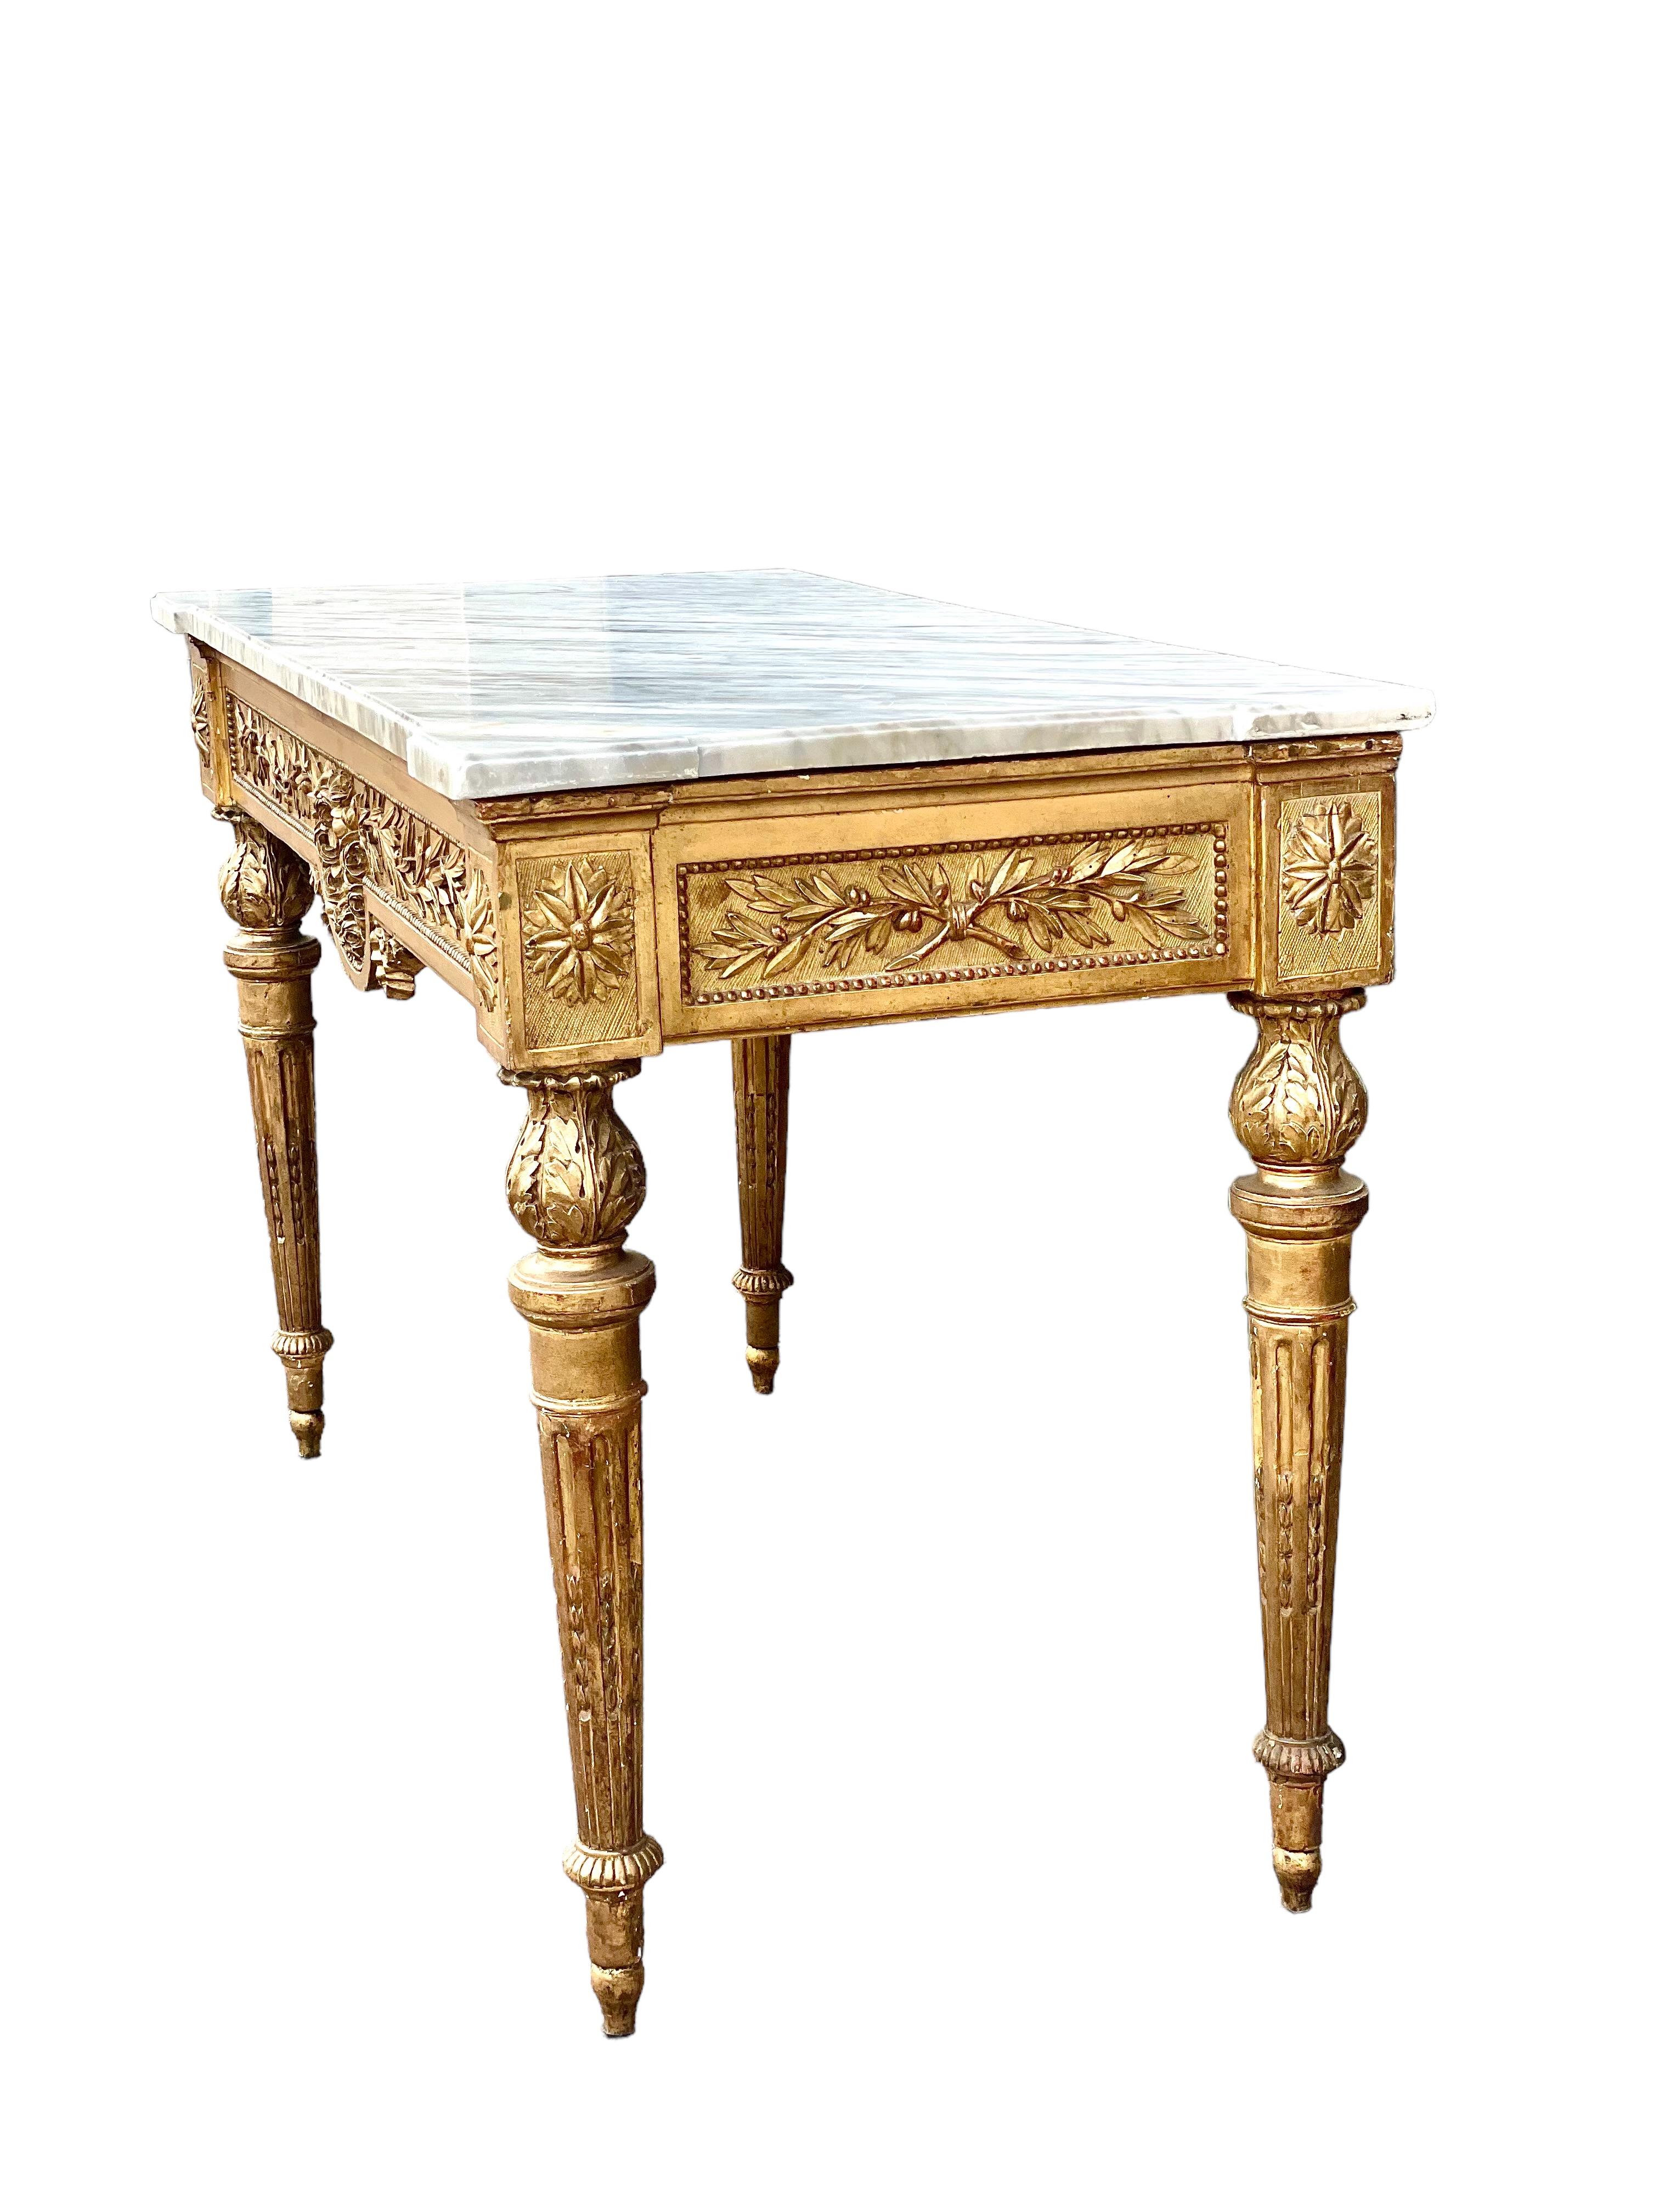 18th Century French Louis XVI Period Giltwood Console Table For Sale 2